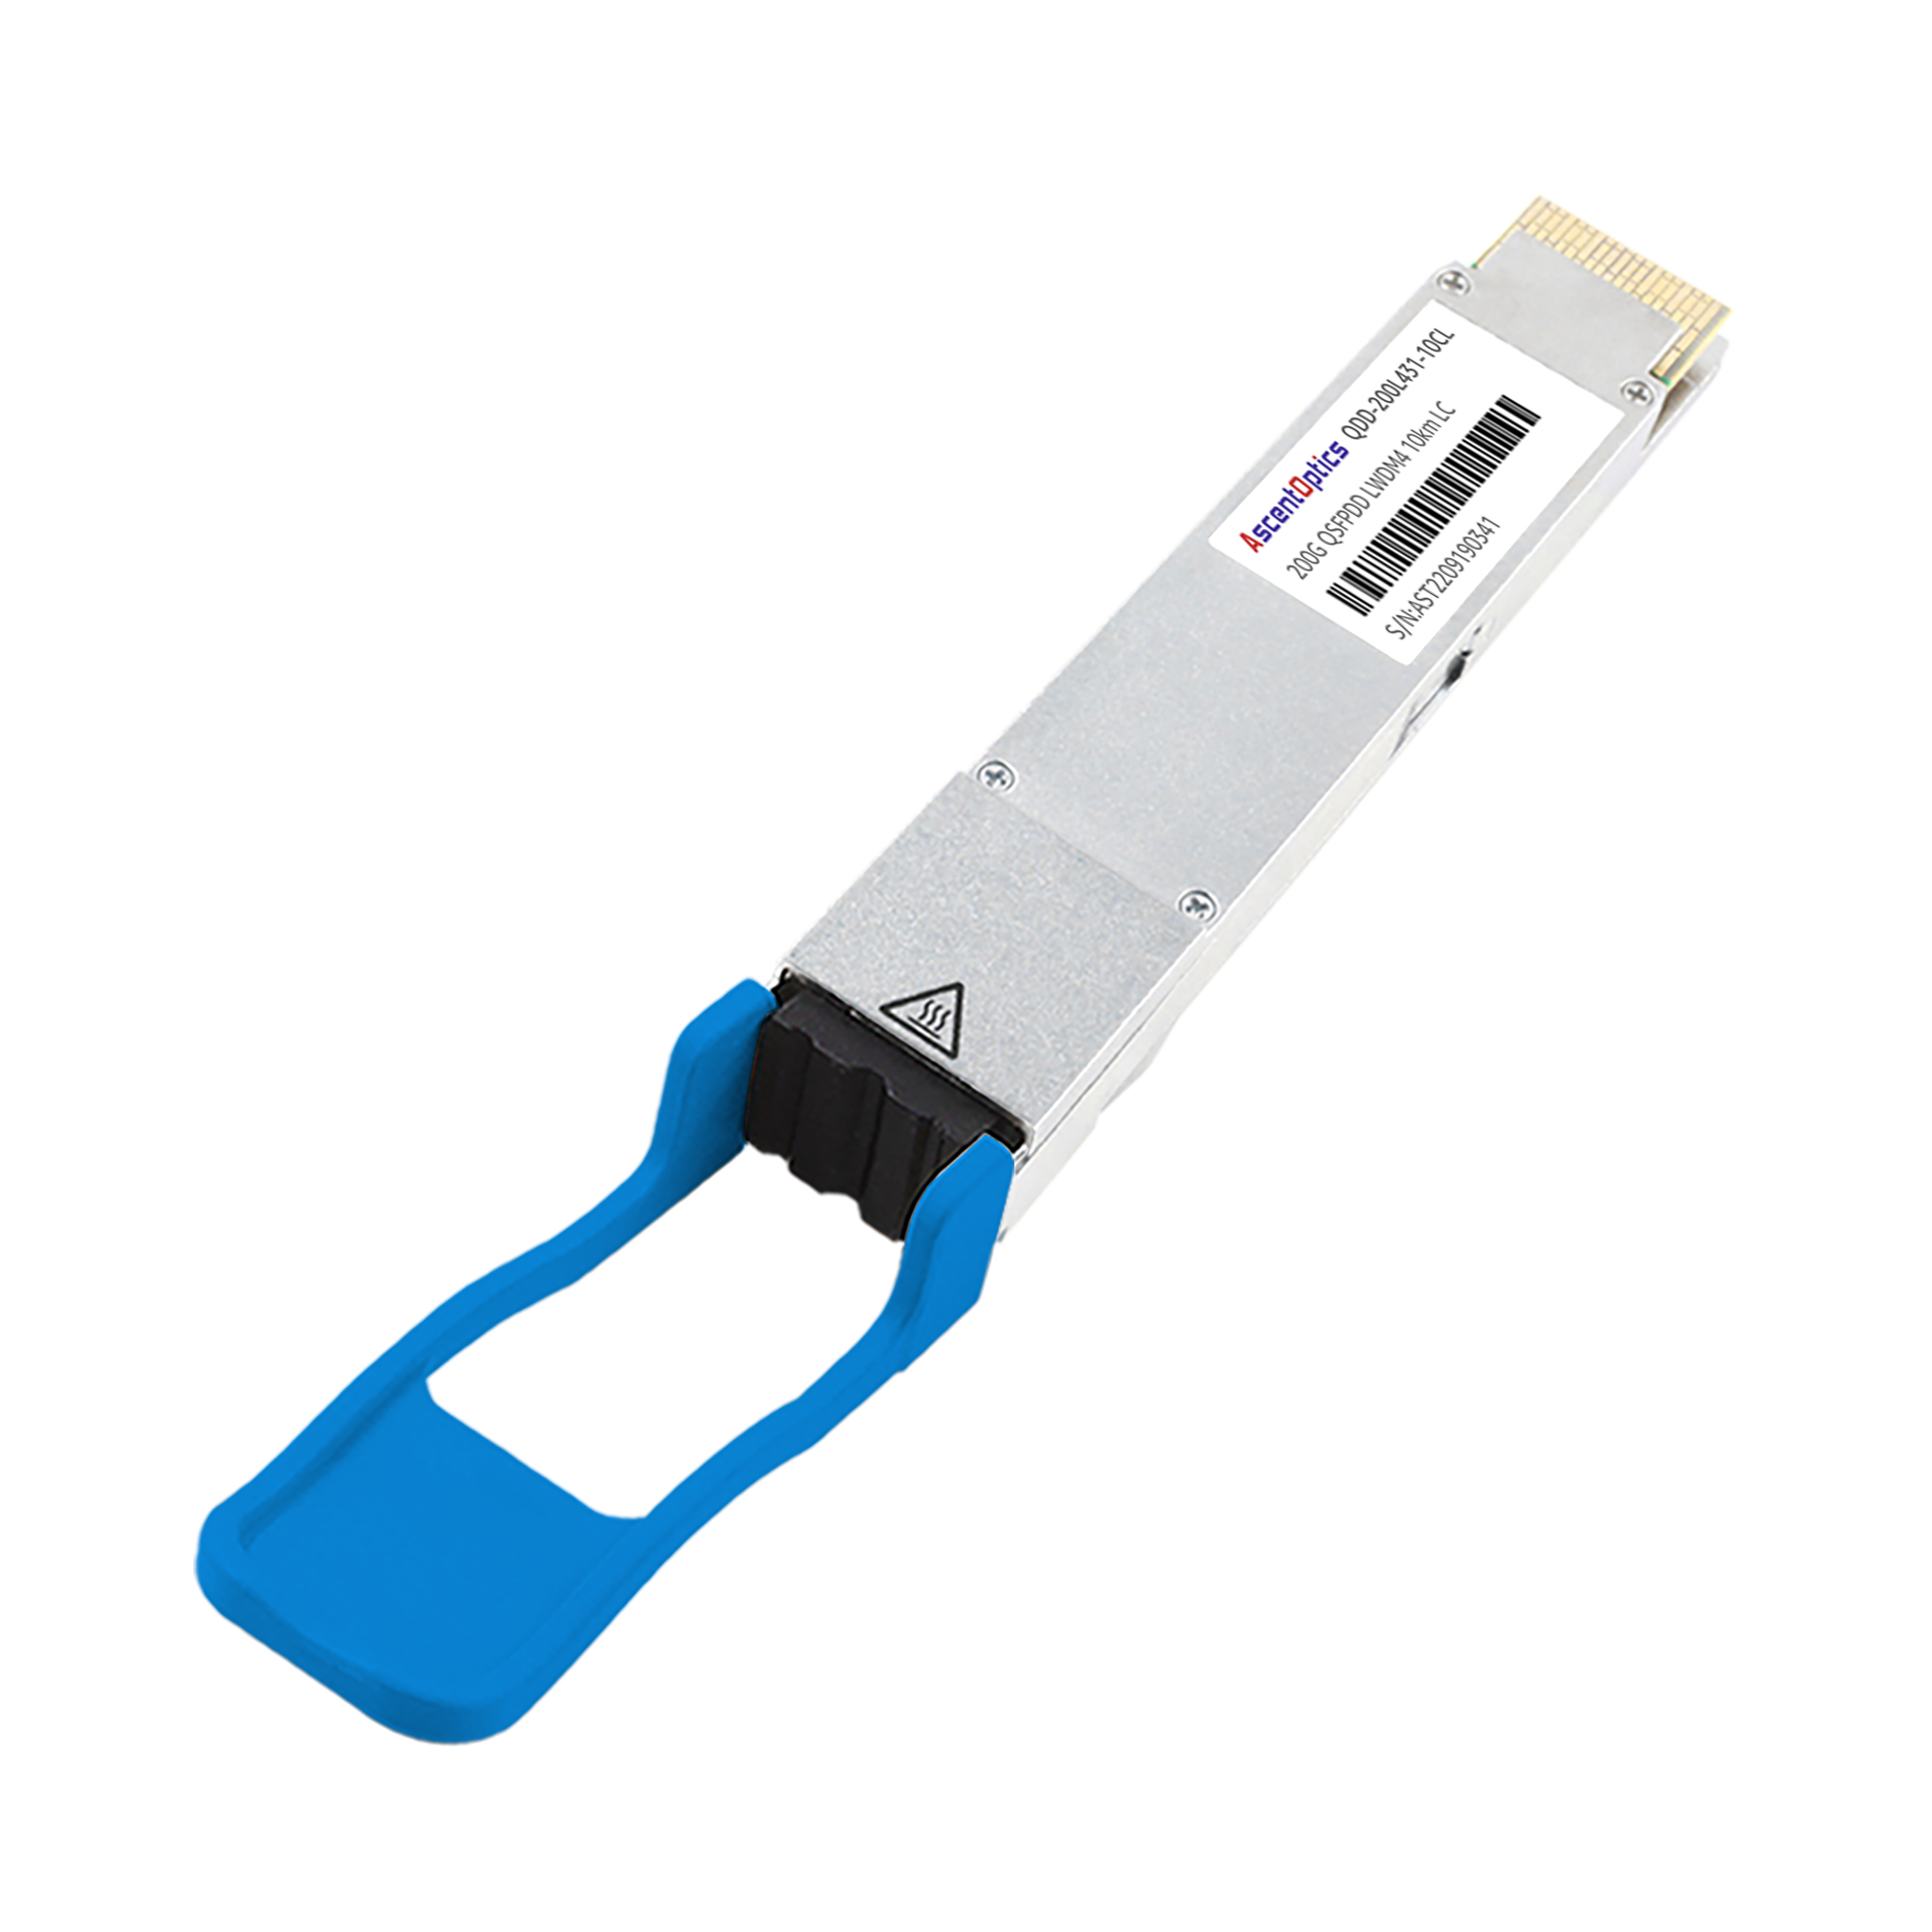 "Explore Ascentoptics for QSFP56 solutions: Elevate network capacity and speed. Discover our high-performance modules today."